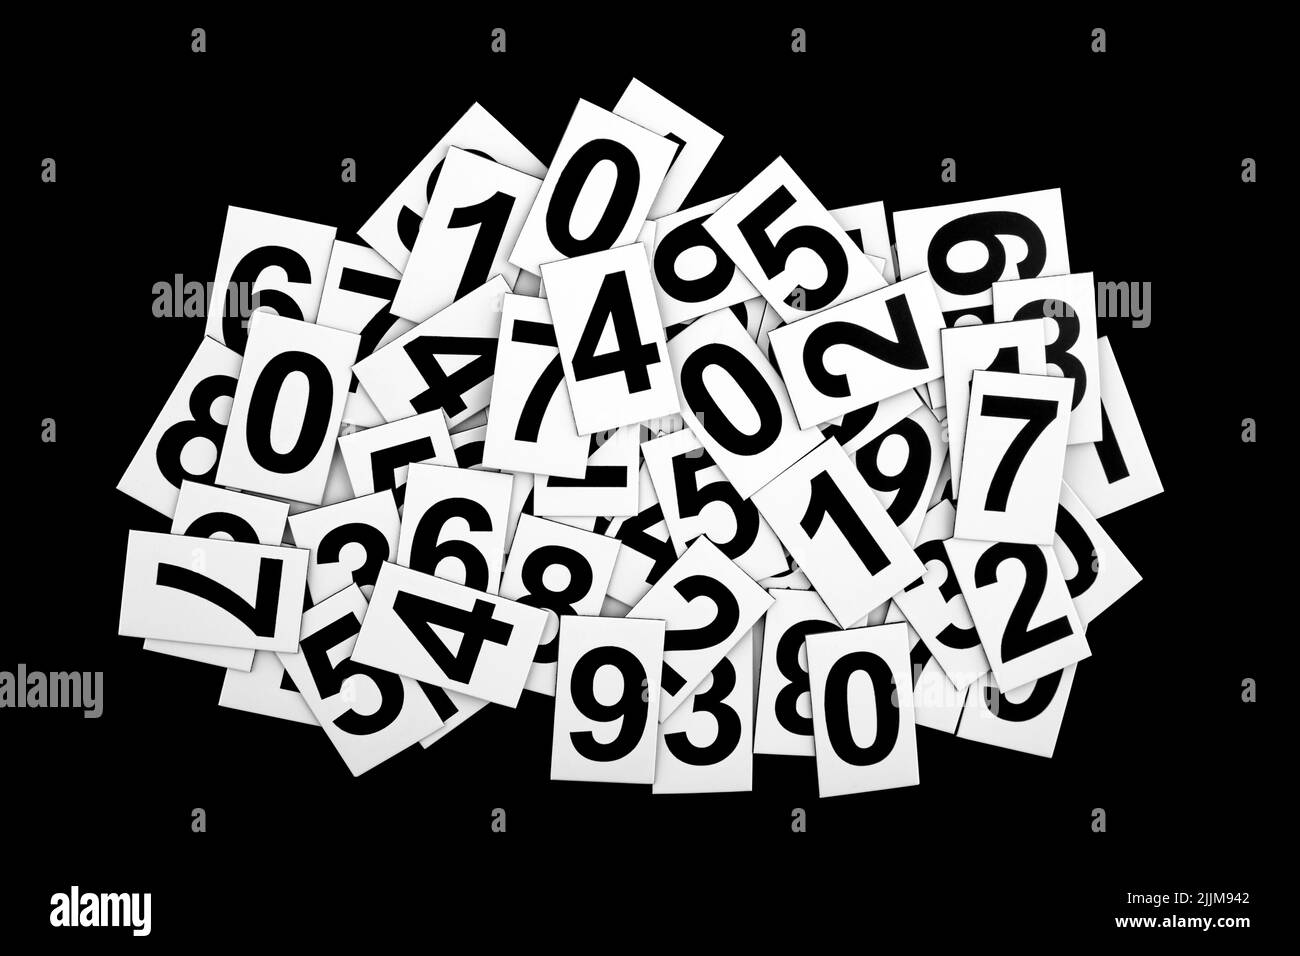 Abstract background with random numbers isolated on black background. Typography background composition. Stock Photo